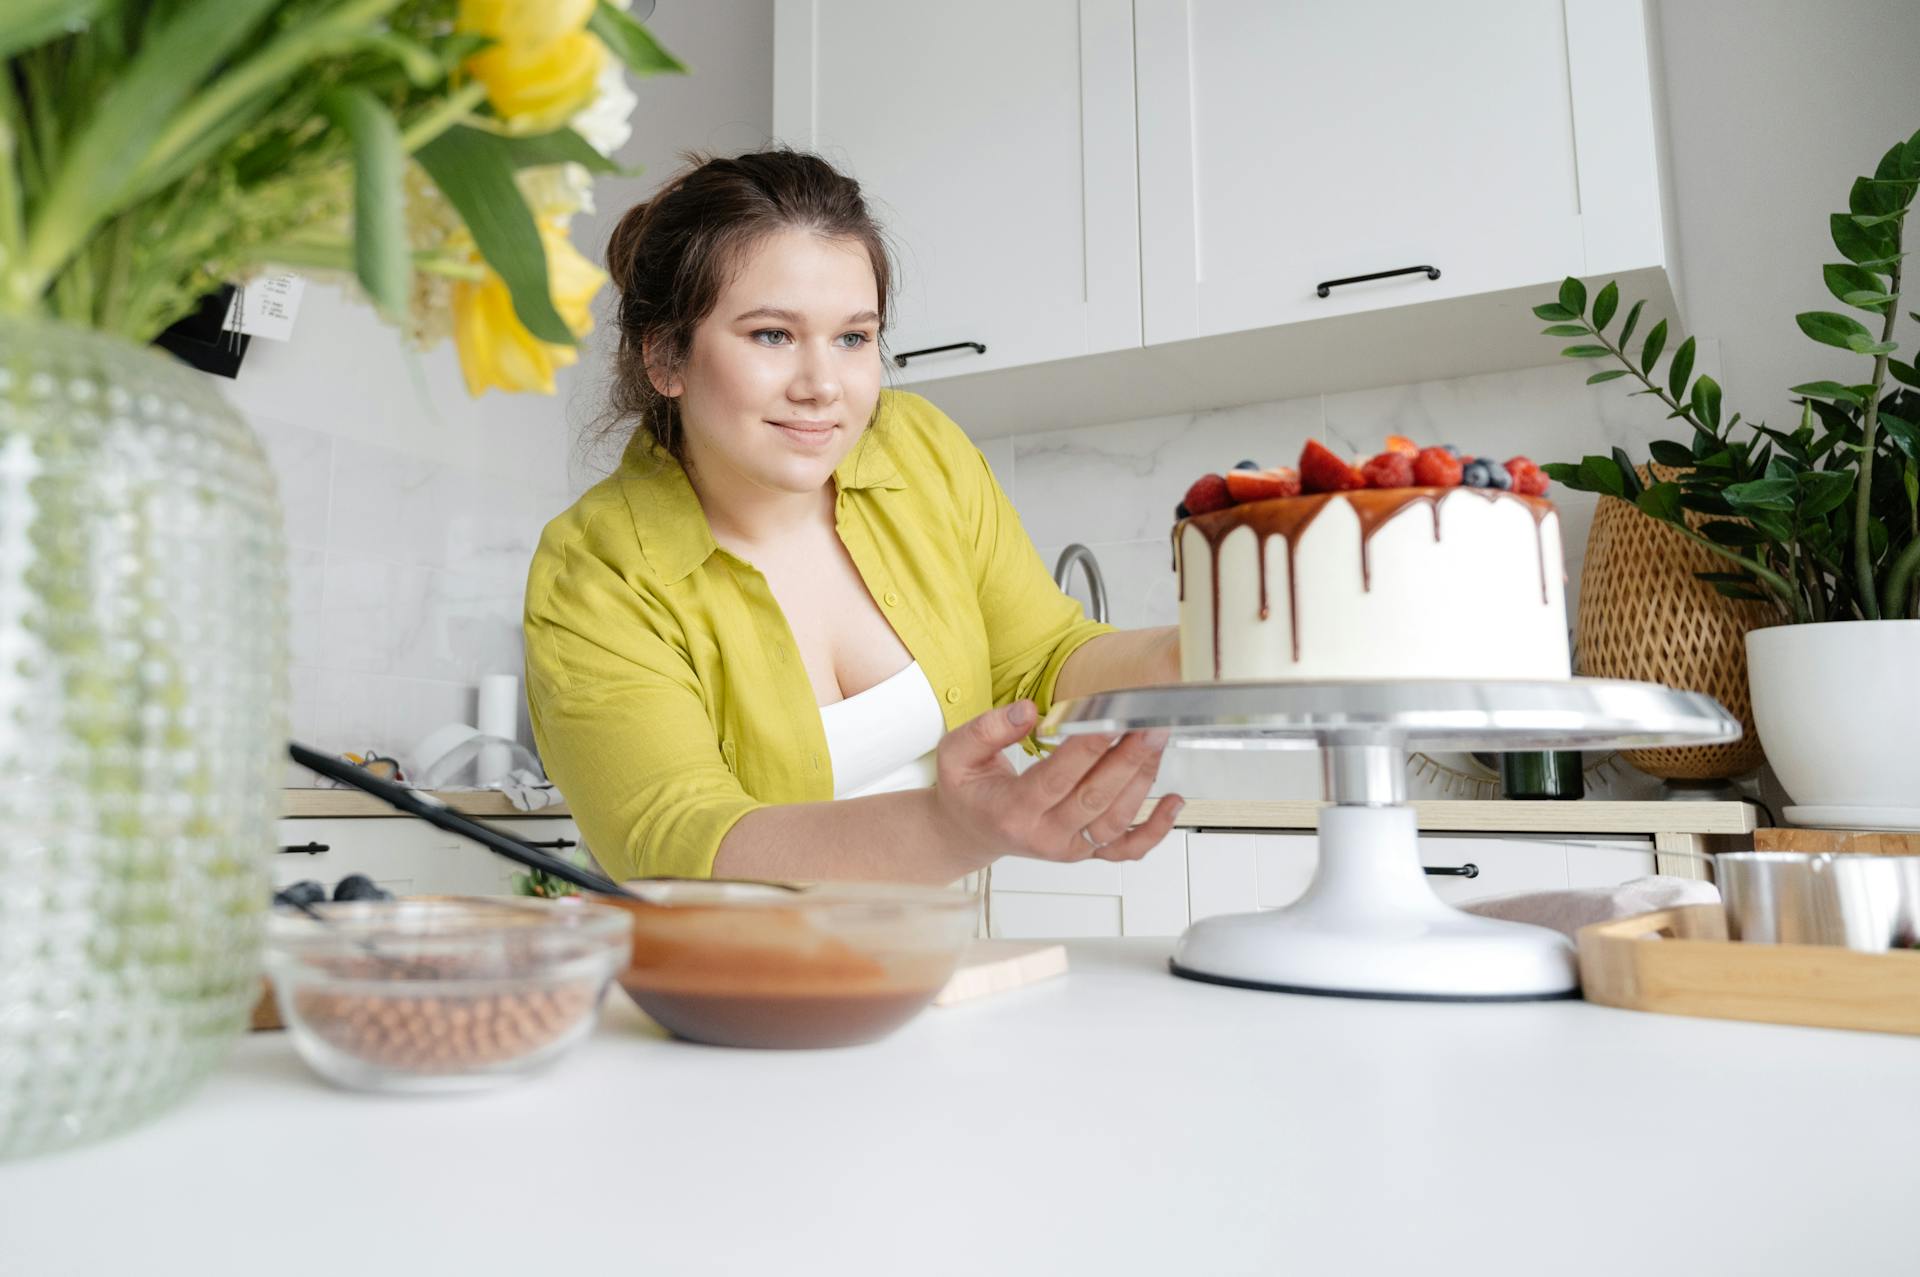 Smiling young female confectioner in casual clothes finishing decoration of tasty cake with chocolate glaze and berries